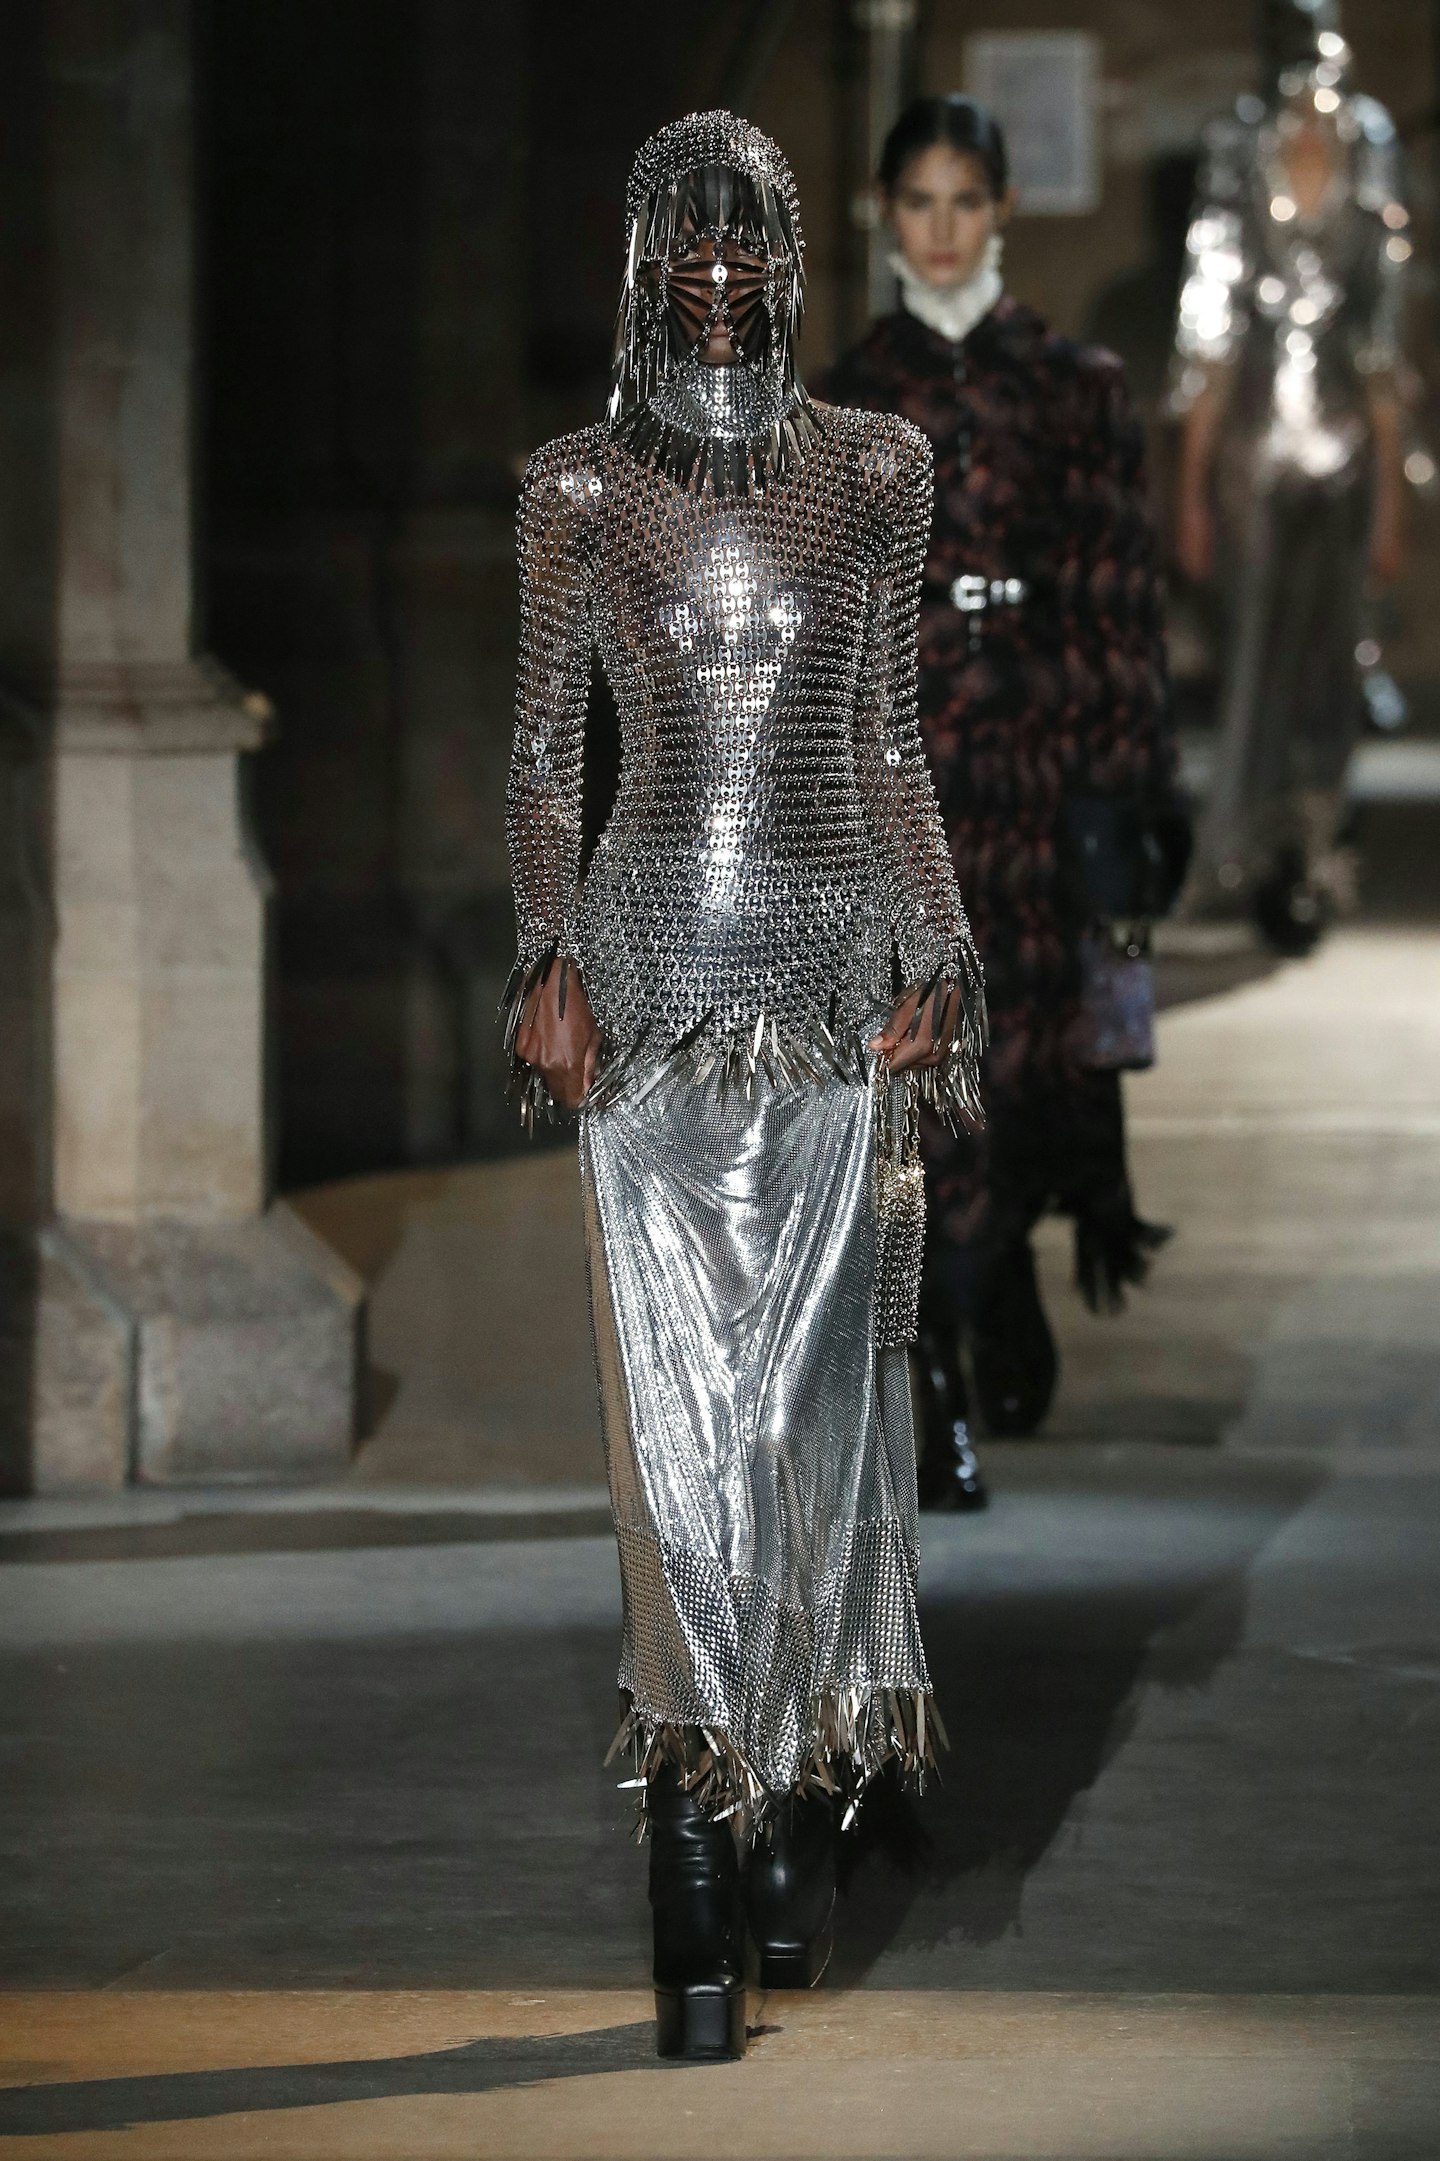 Paco Rabanne opts for armour